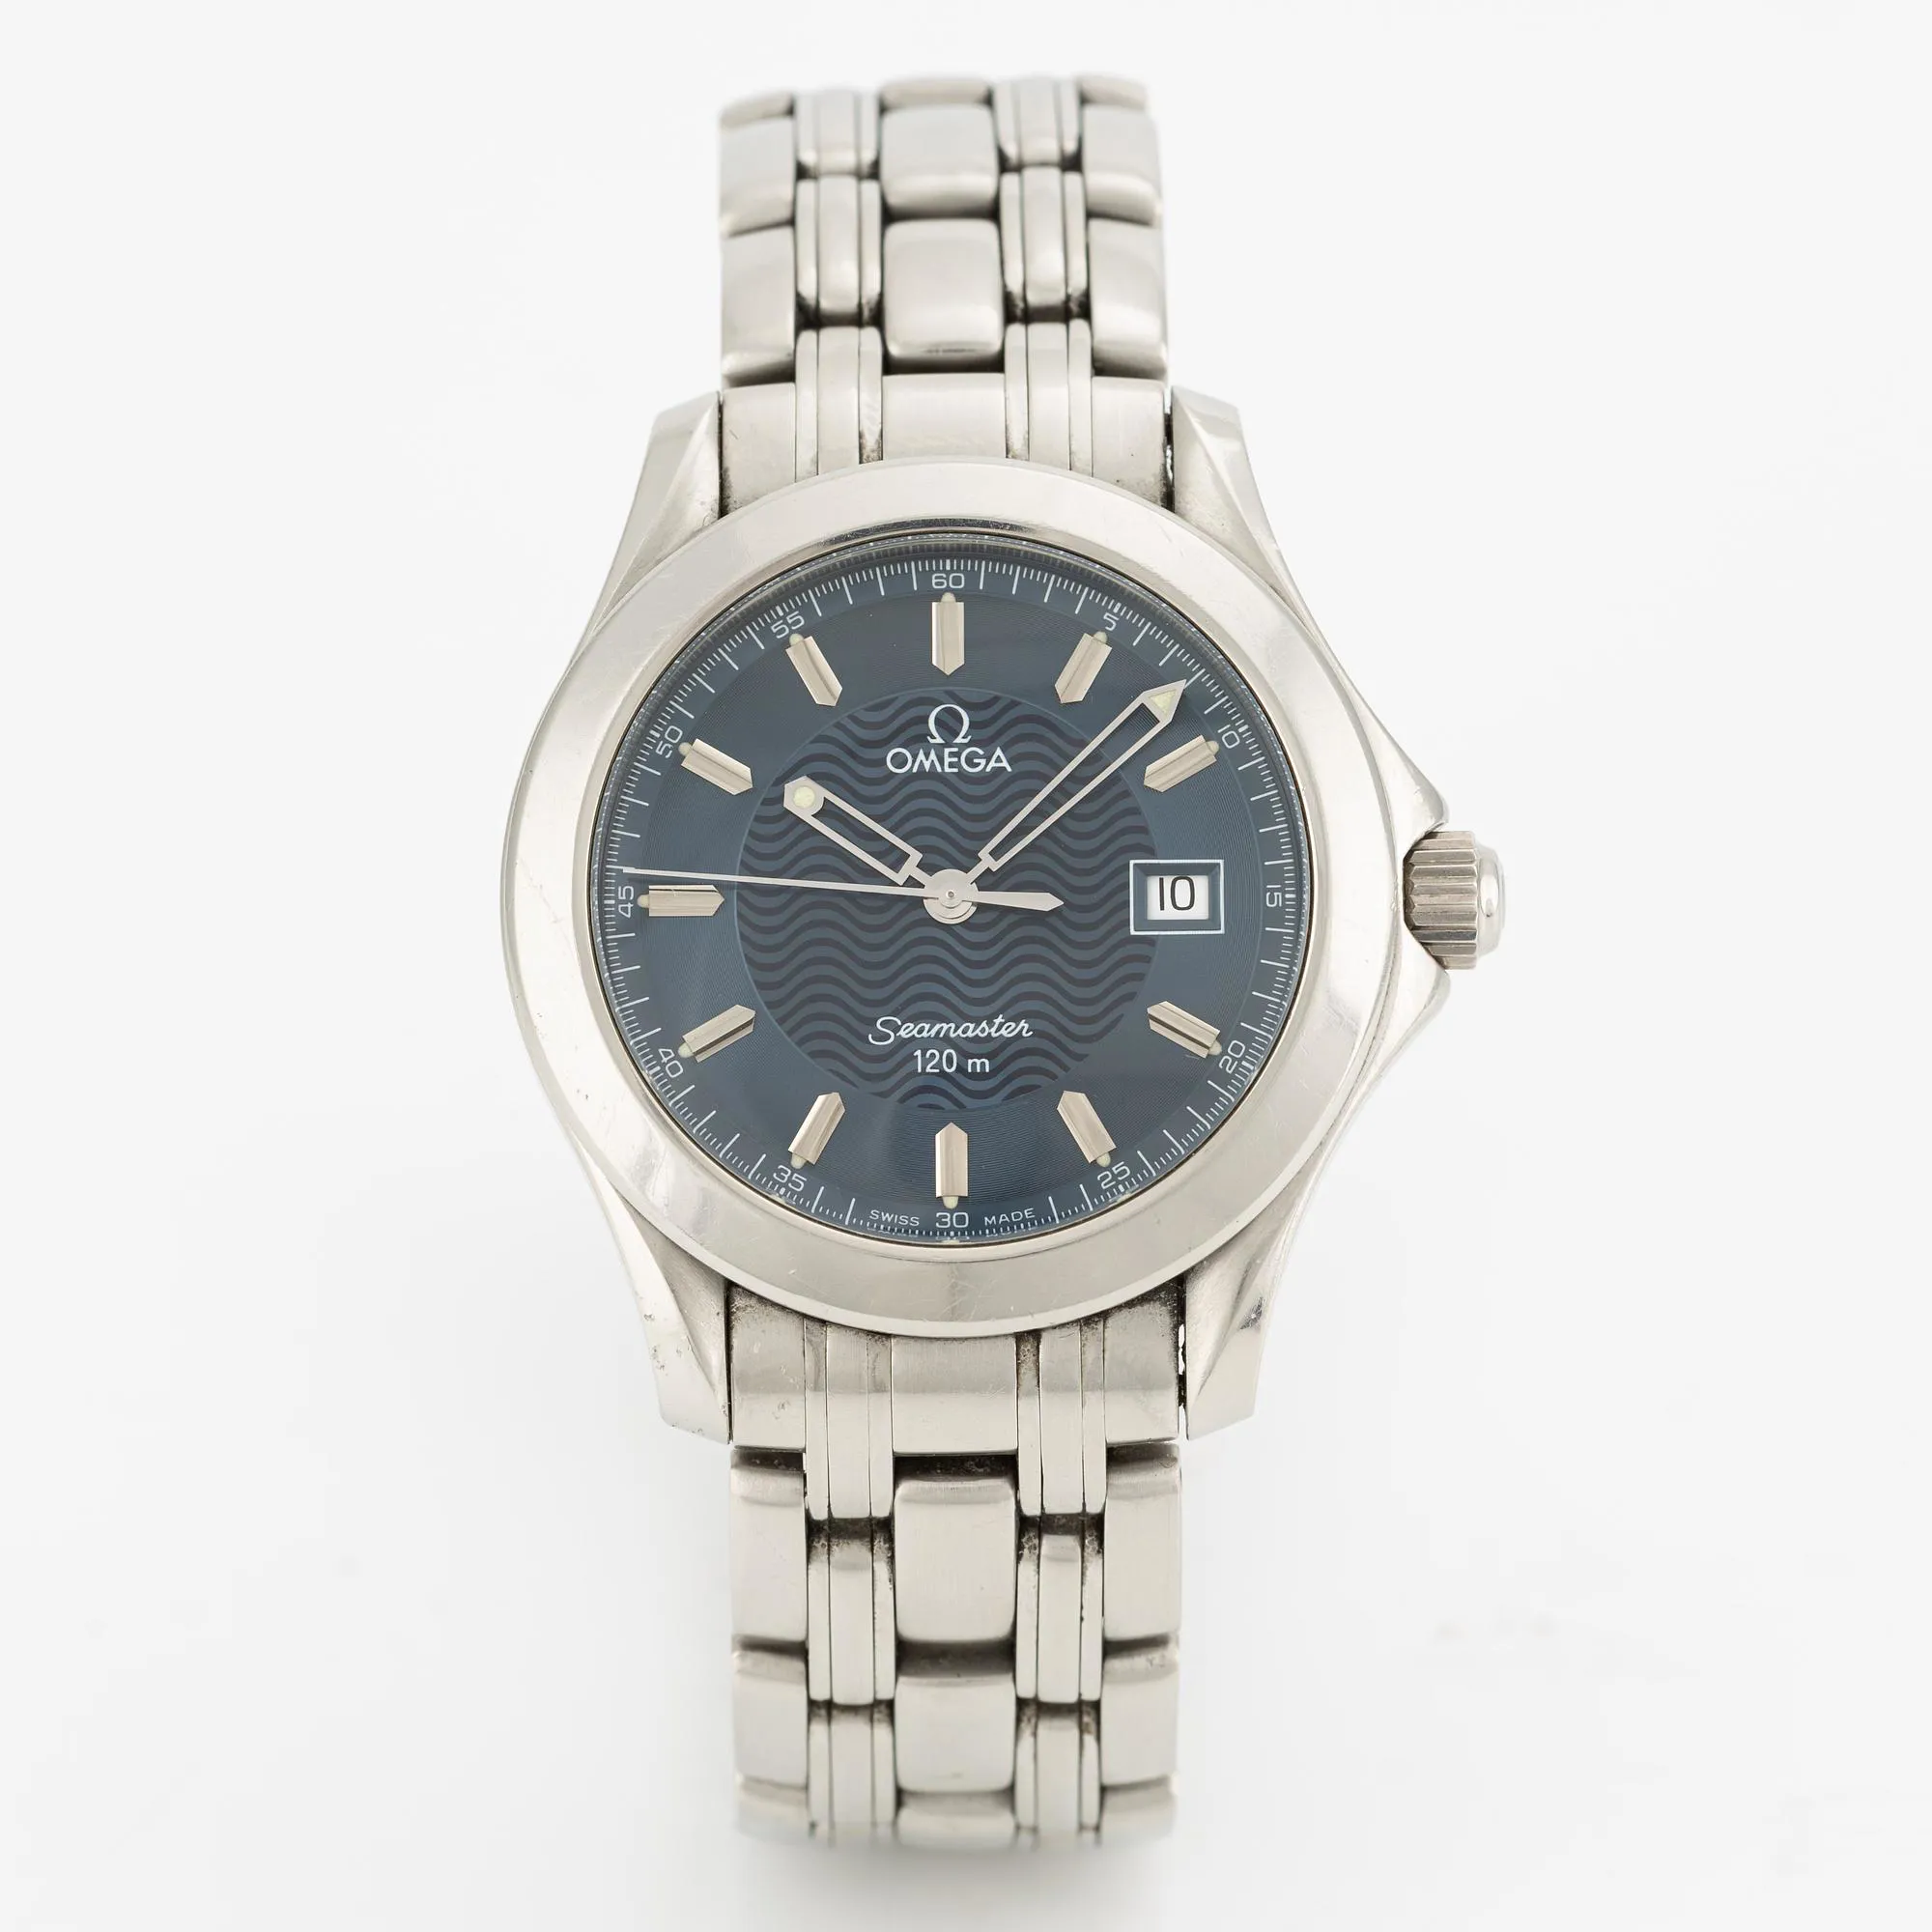 Omega Seamaster 1501/823 36mm Stainless steel